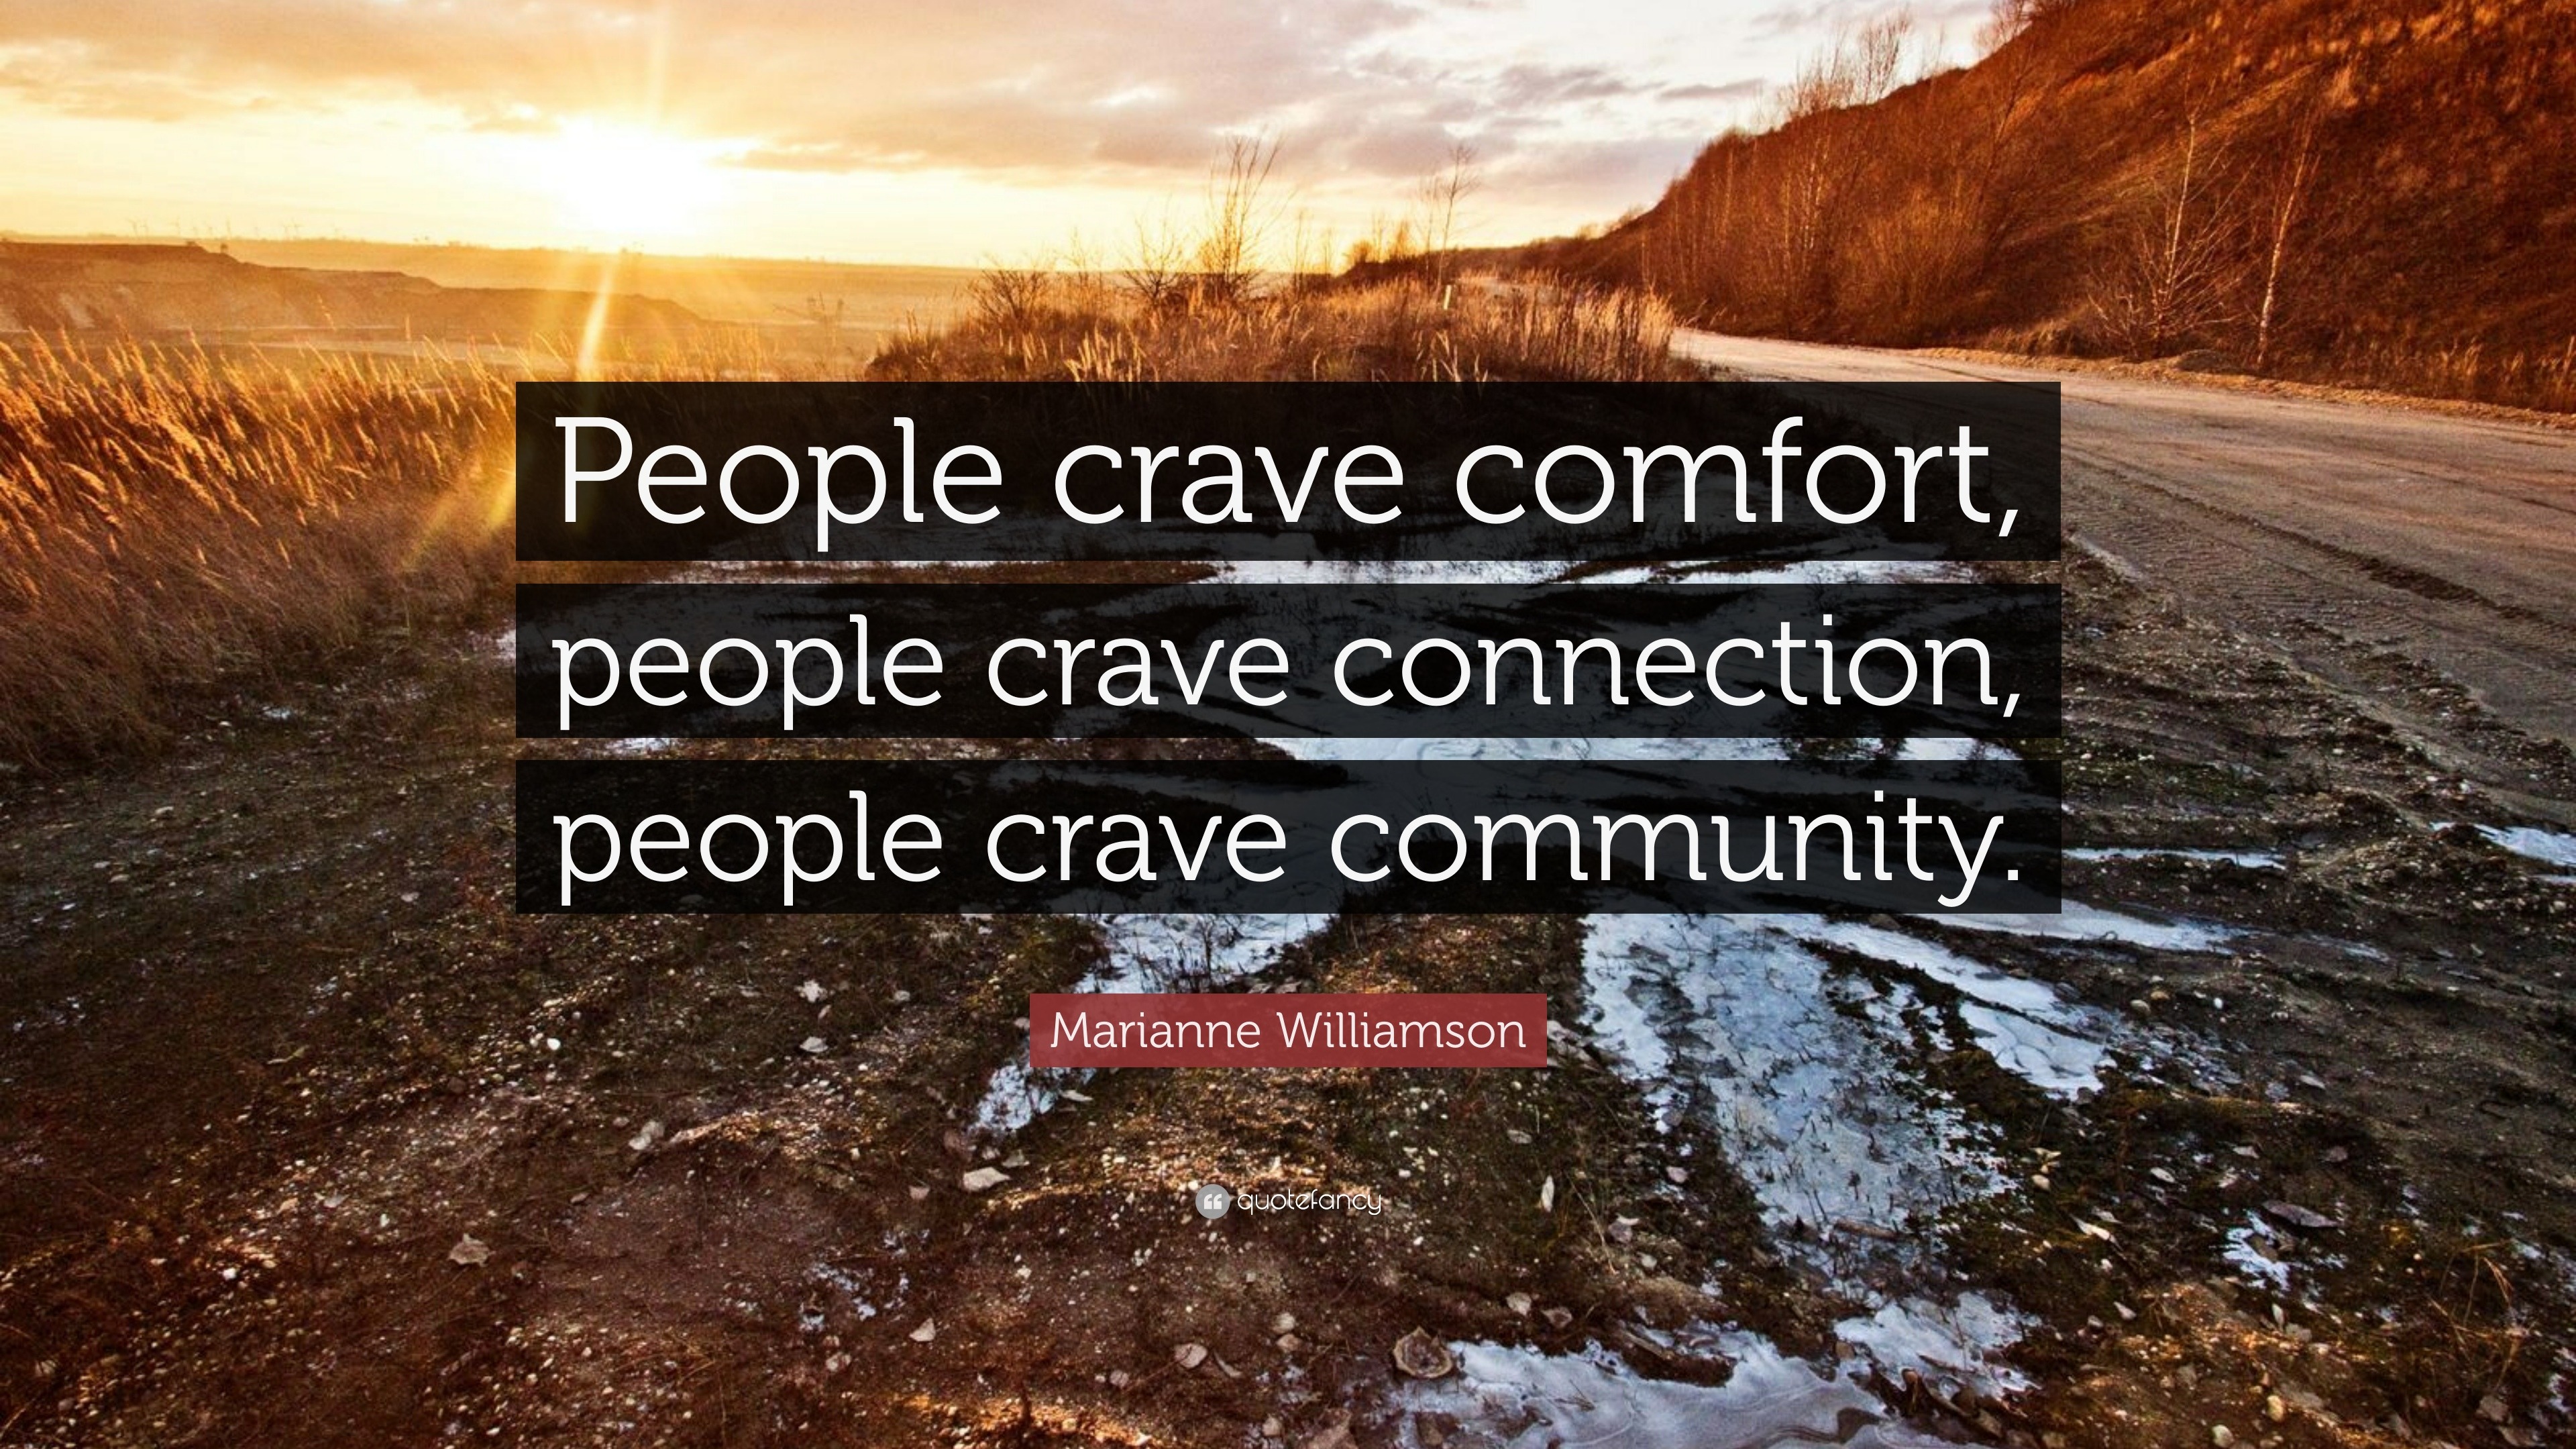 Marianne Williamson Quote “People crave comfort, people